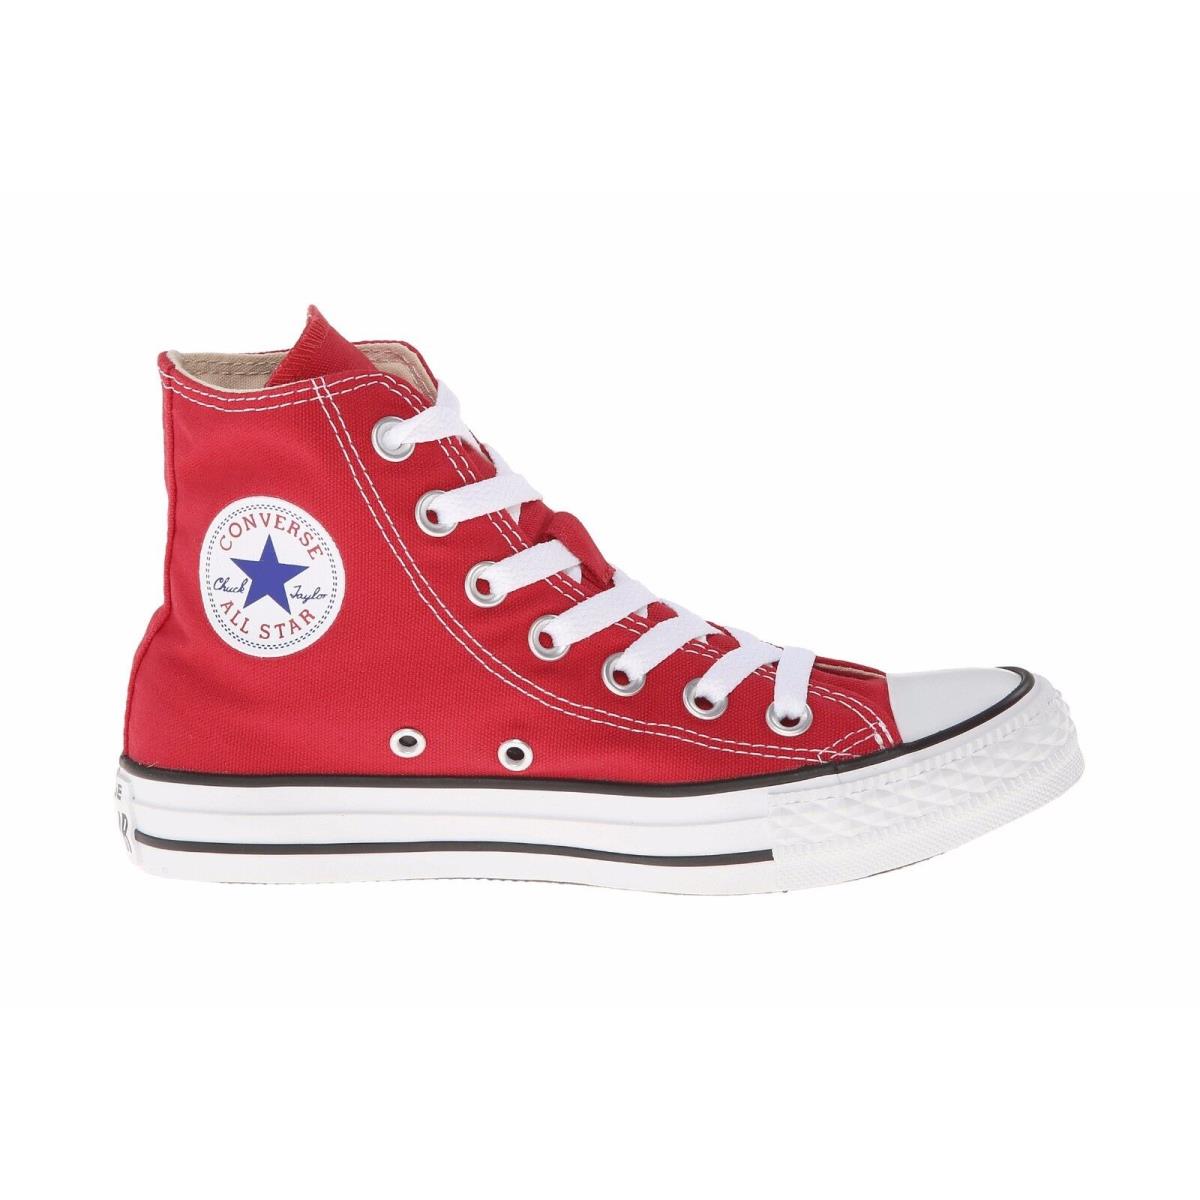 Converse All Star Chuck Taylor Red Hi Top Canvas Women`s Shoes Sneakers M9621 - Red